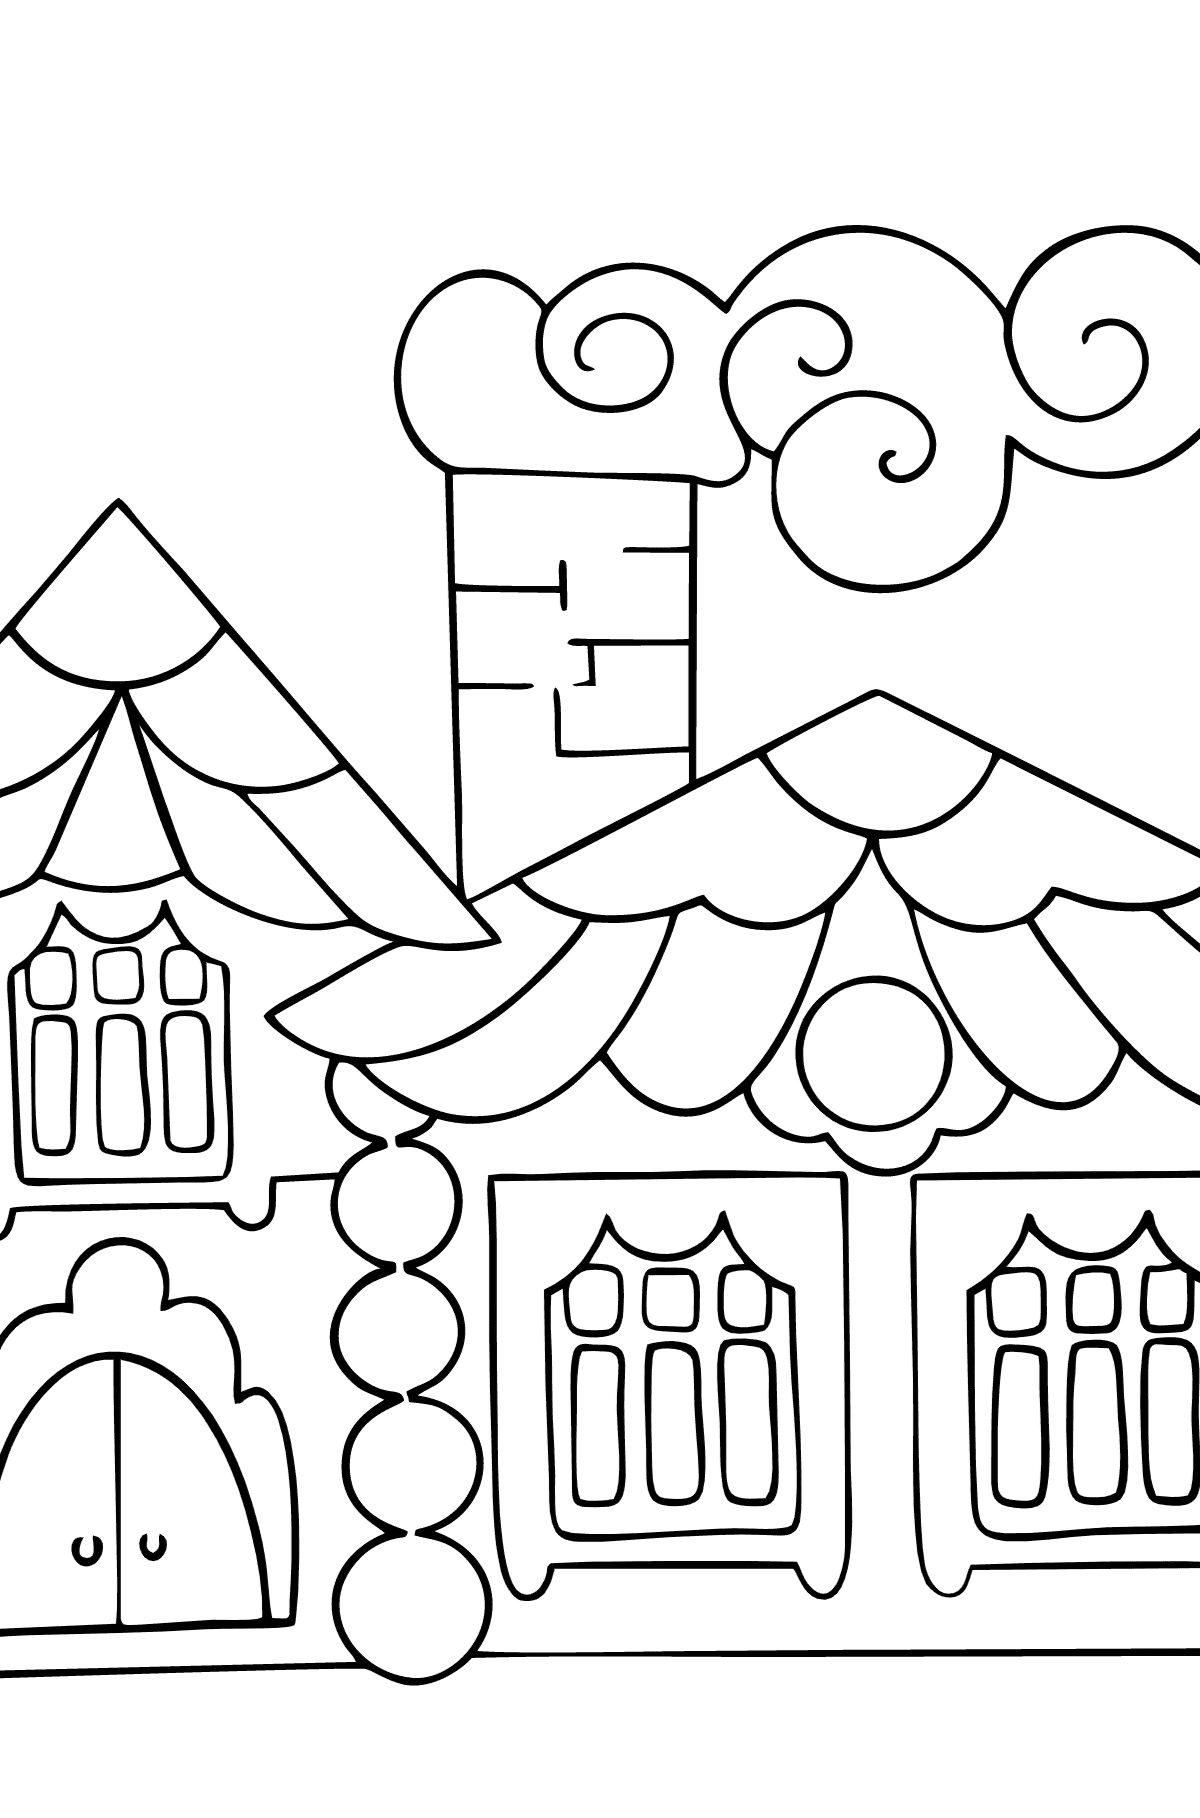 Simple Coloring Page - A House in the Forest - Coloring Pages for Children